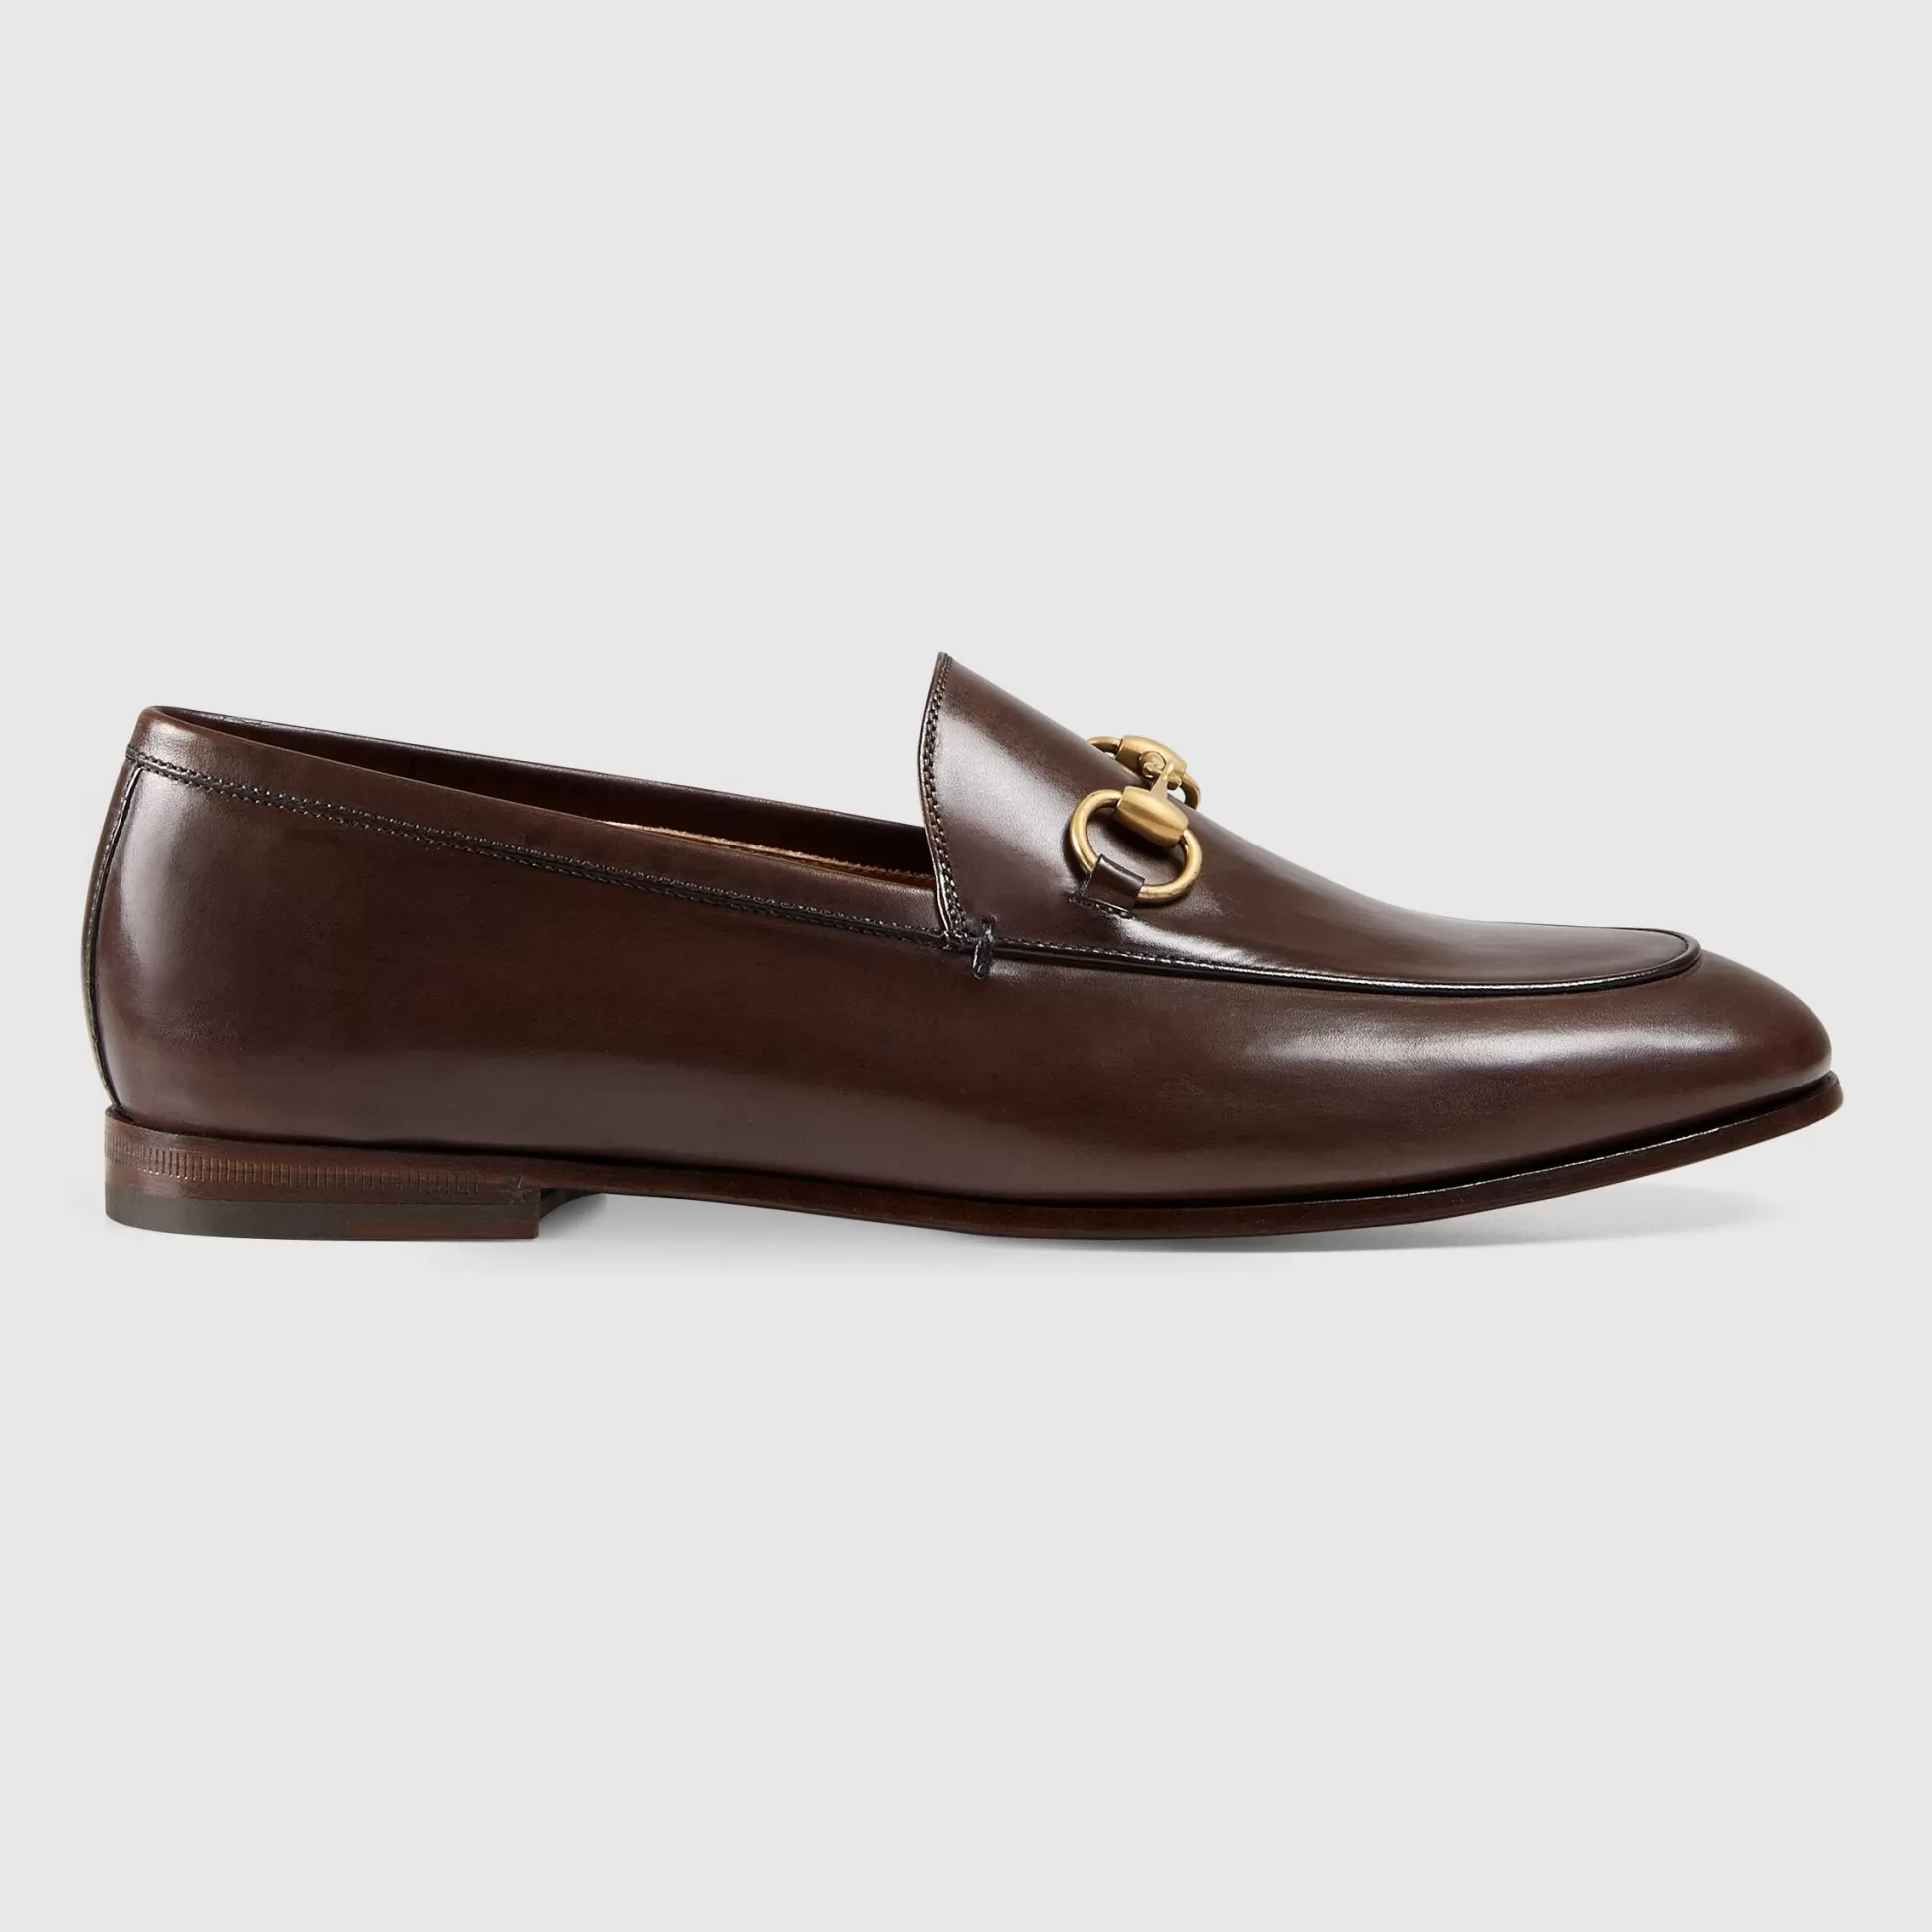 GUCCI Women'S Jordaan Leather Loafer-Women Loafers & Lace-Ups